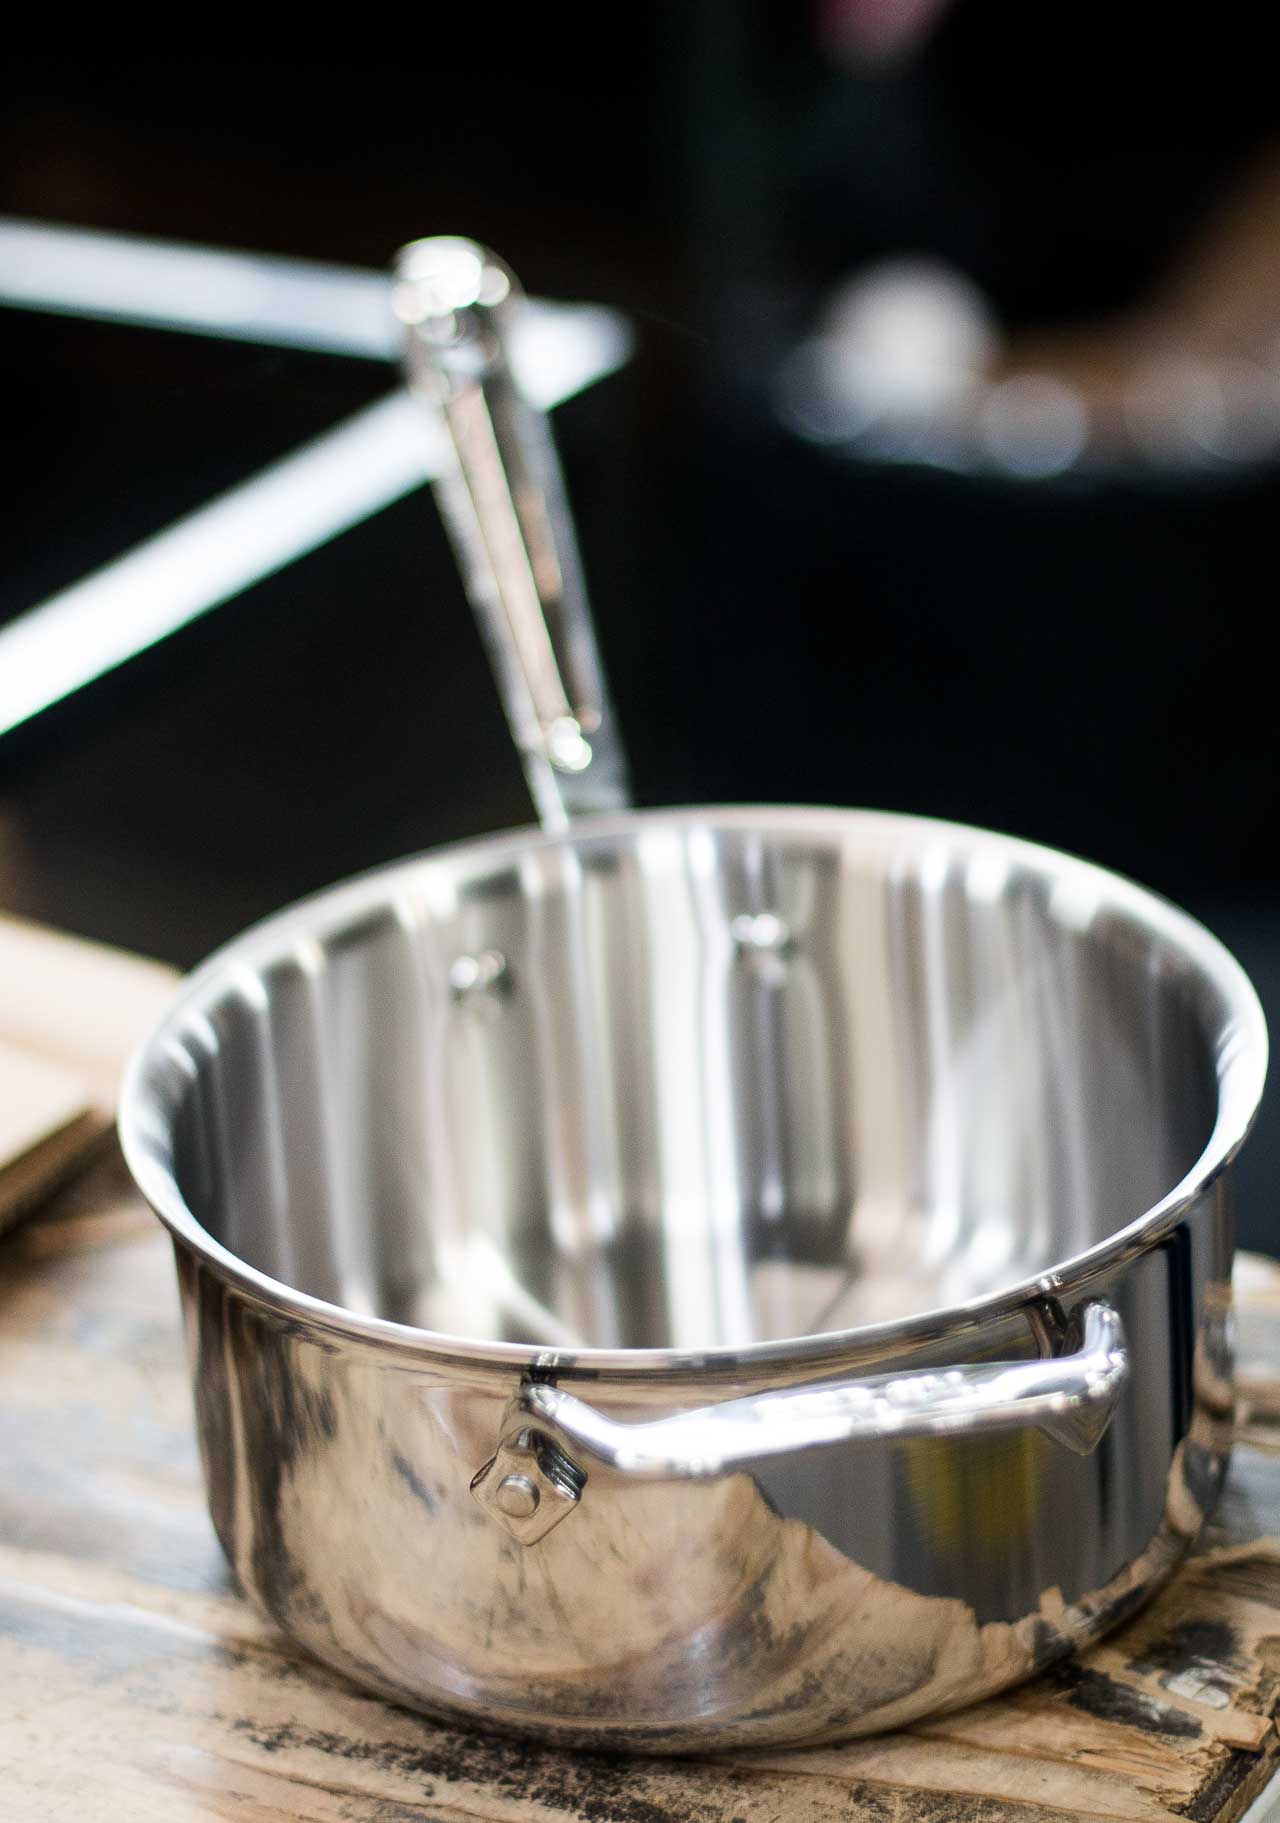 All-Clad factory sale: The top 5 All-Clad cookware deals to shop